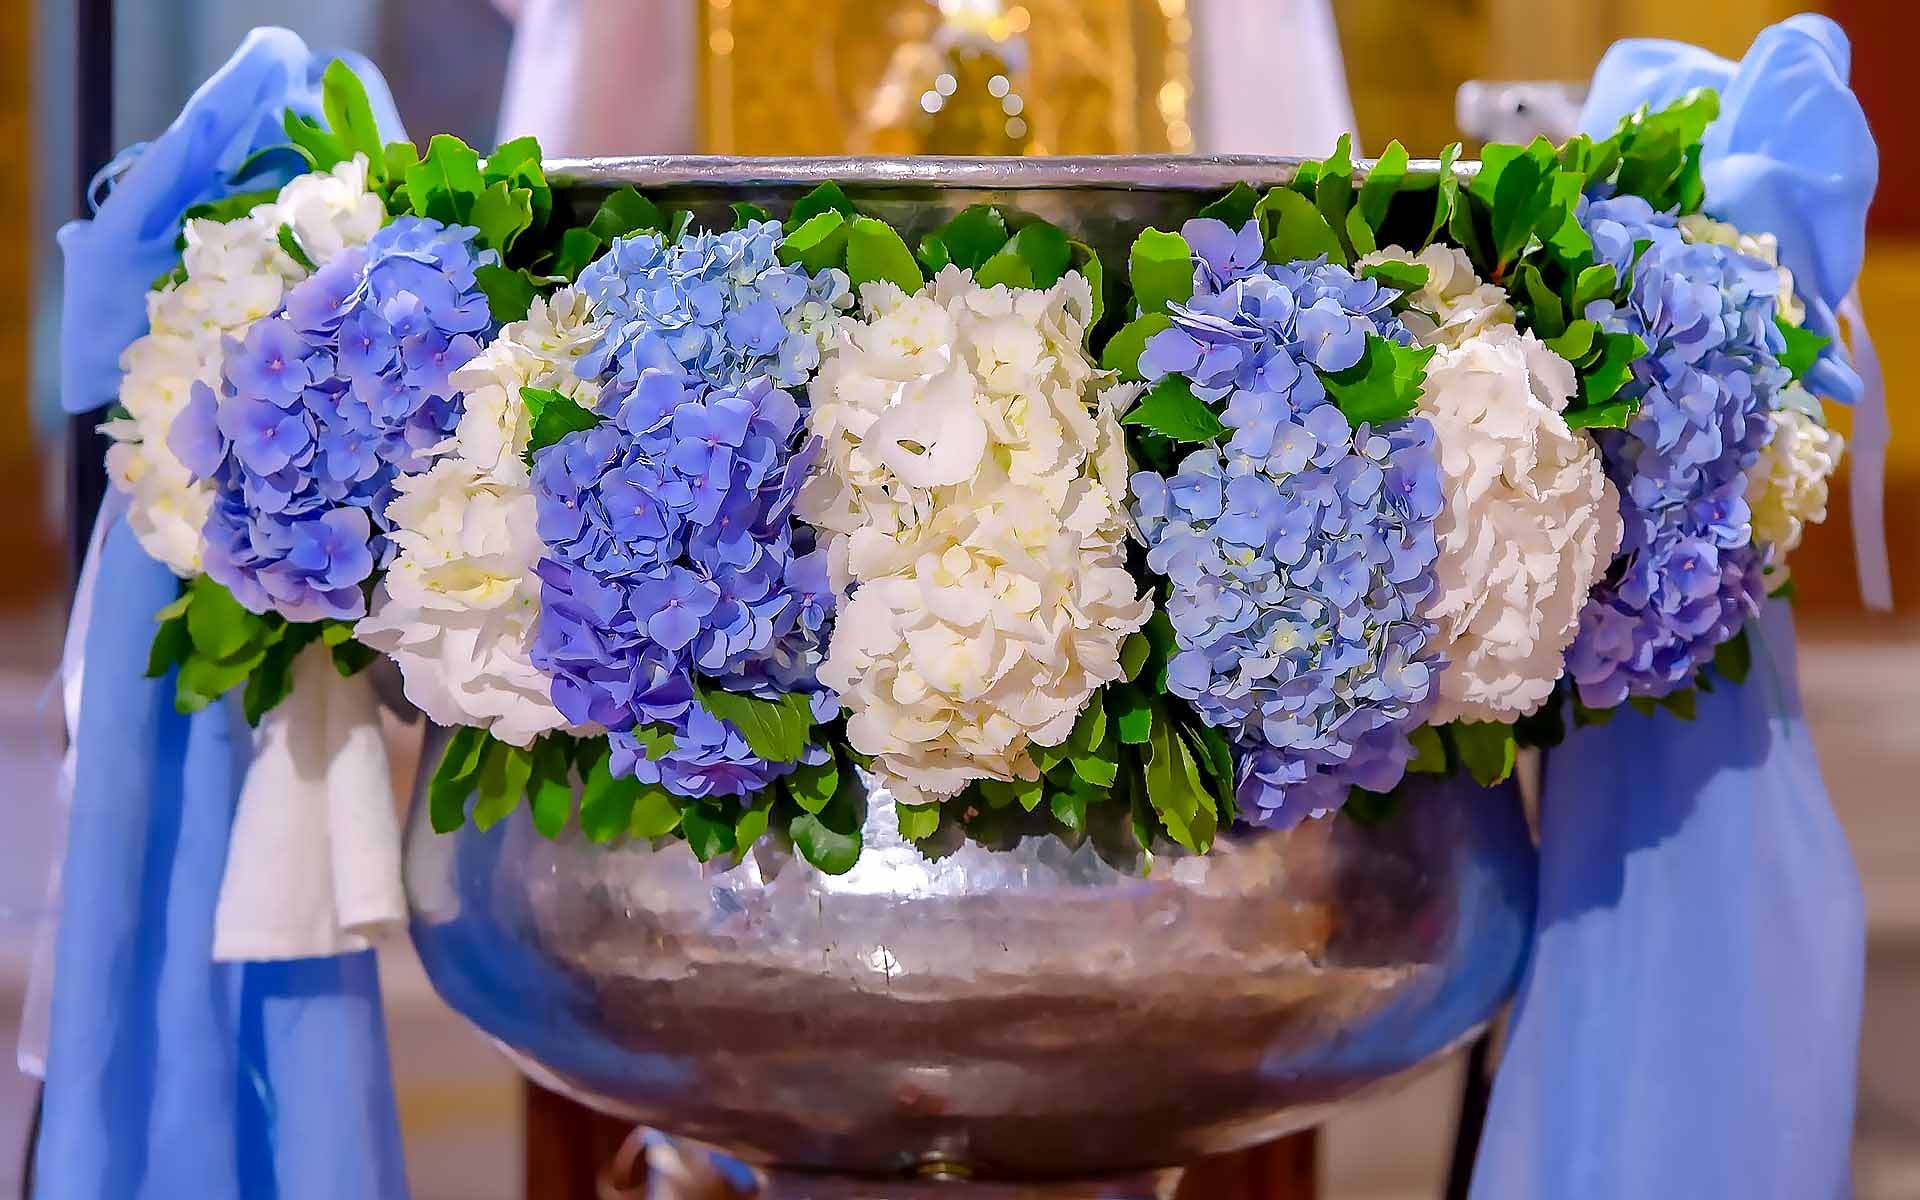 The-Silver-Baptismal-Basin-Accentuates-The-Beautiful-Blue-And-White-Hydrangeas